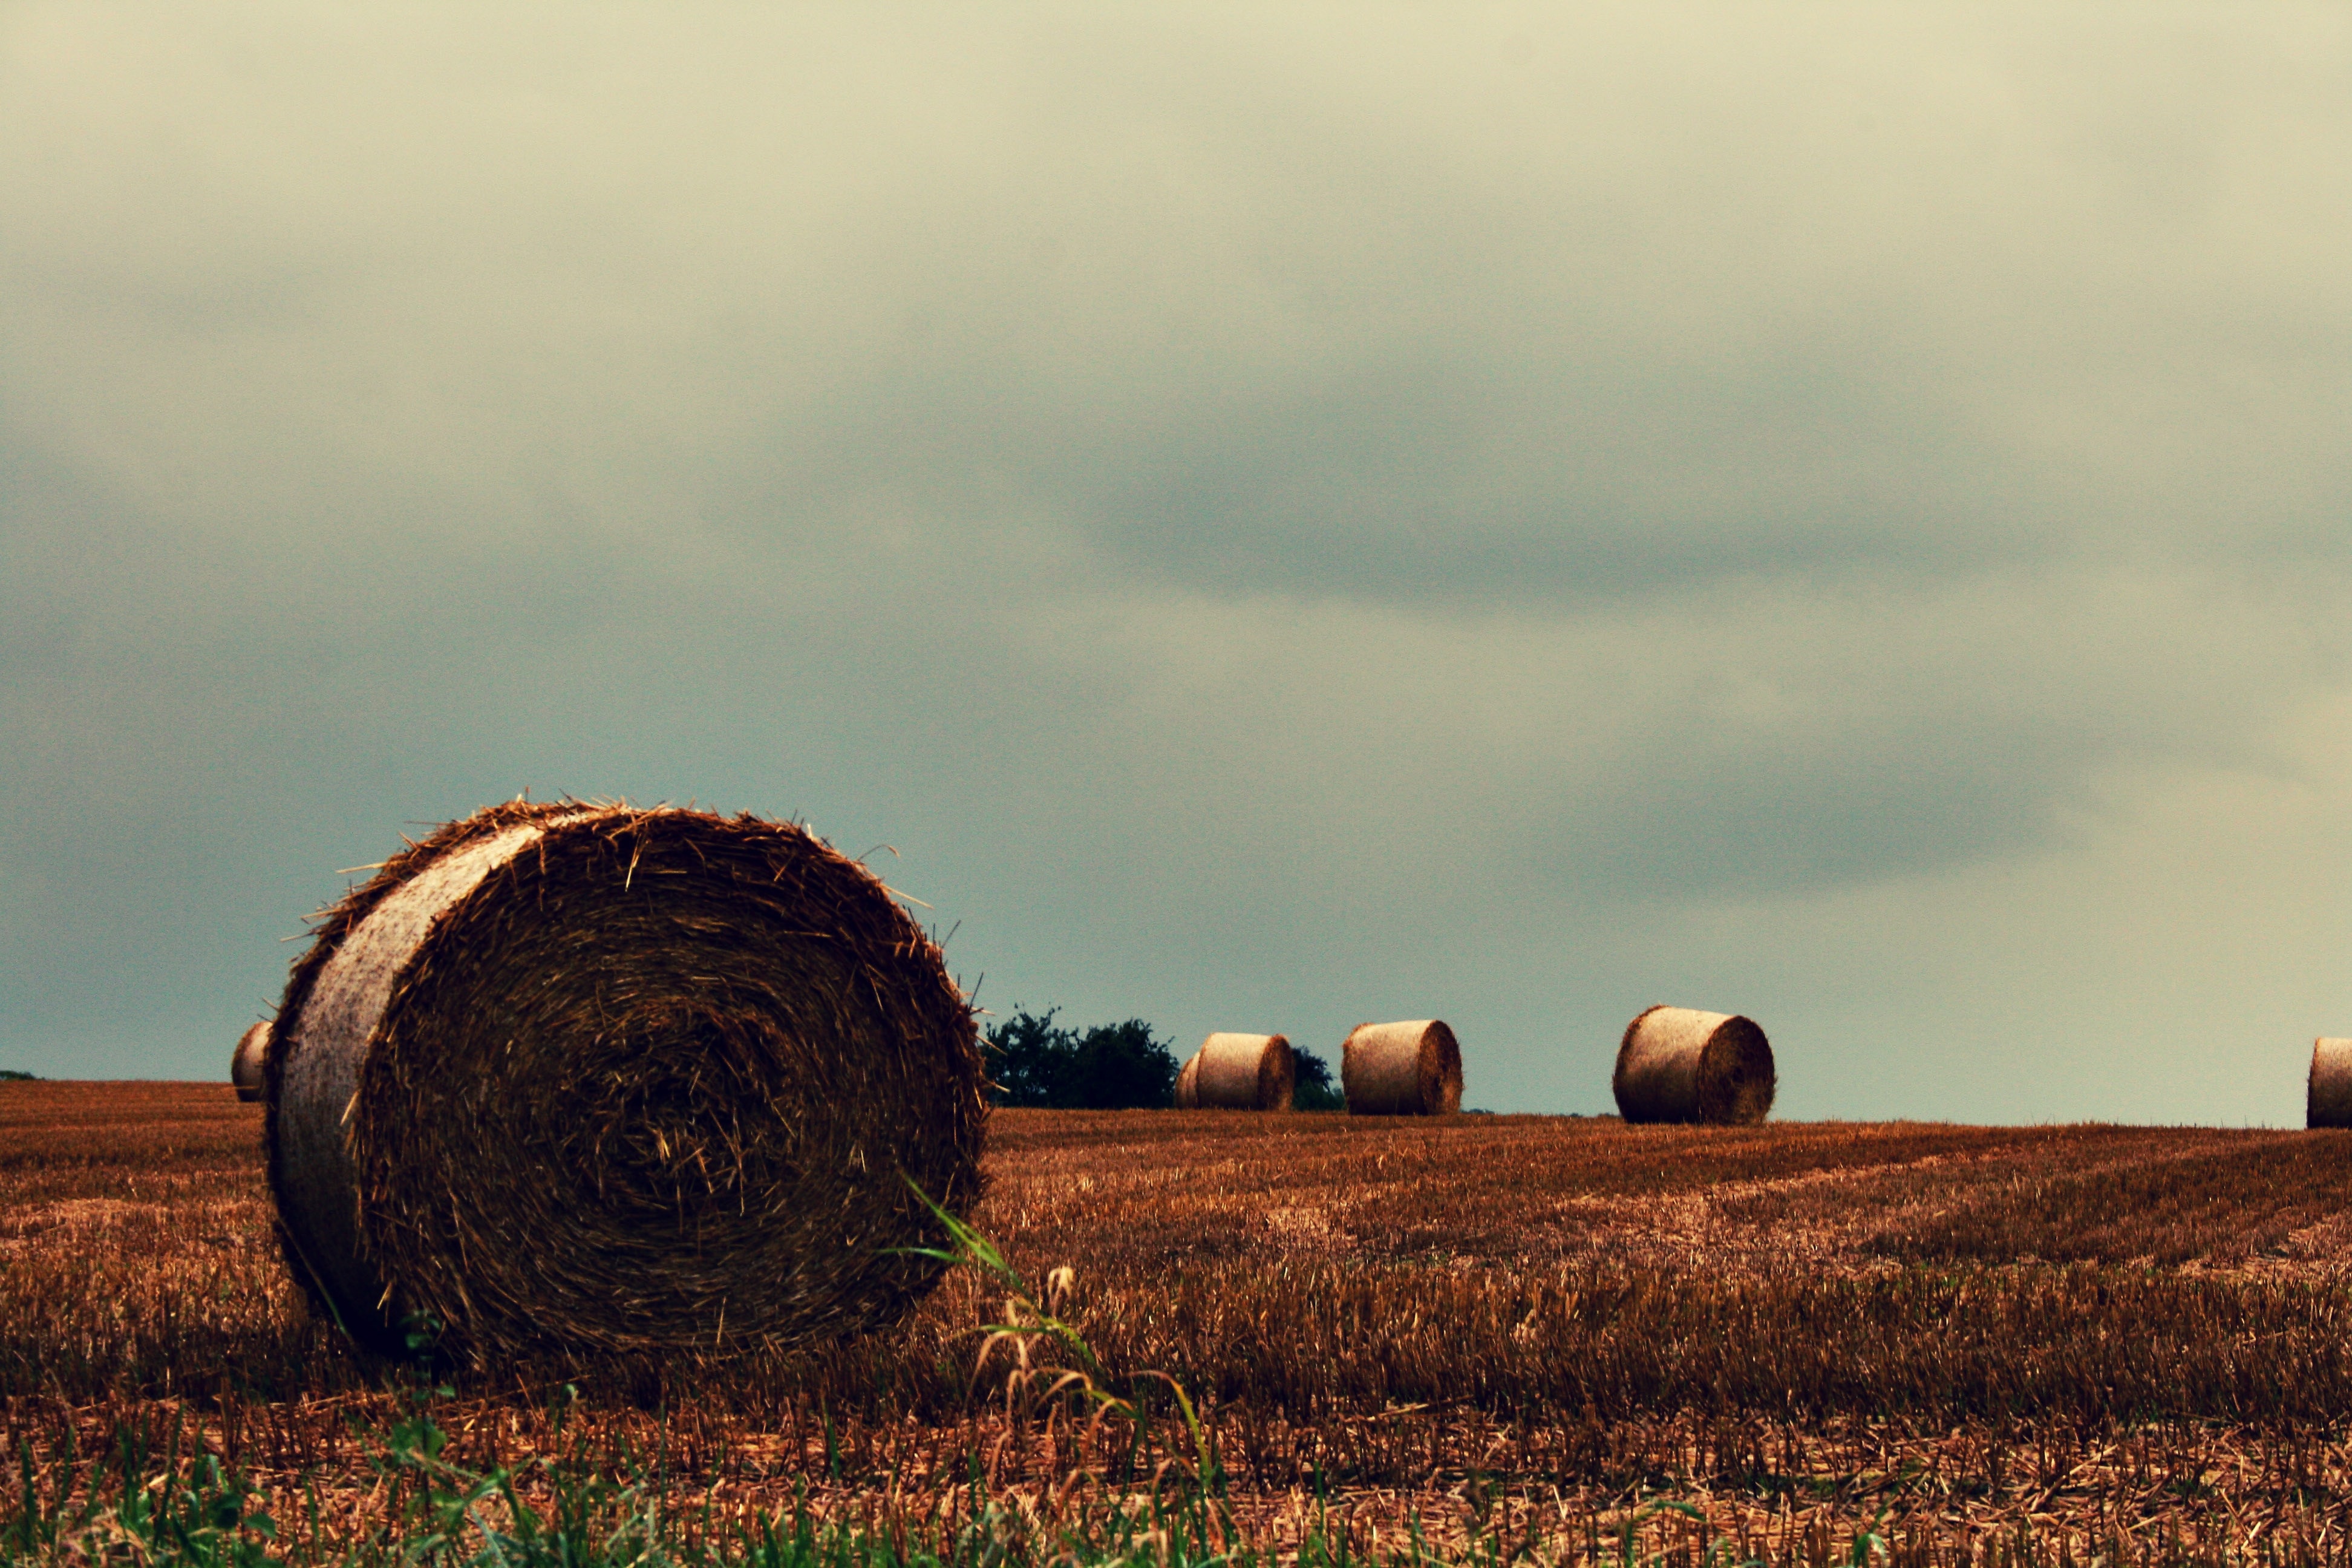 photo of 6 hayrolls on field under cloudy sky during daytime